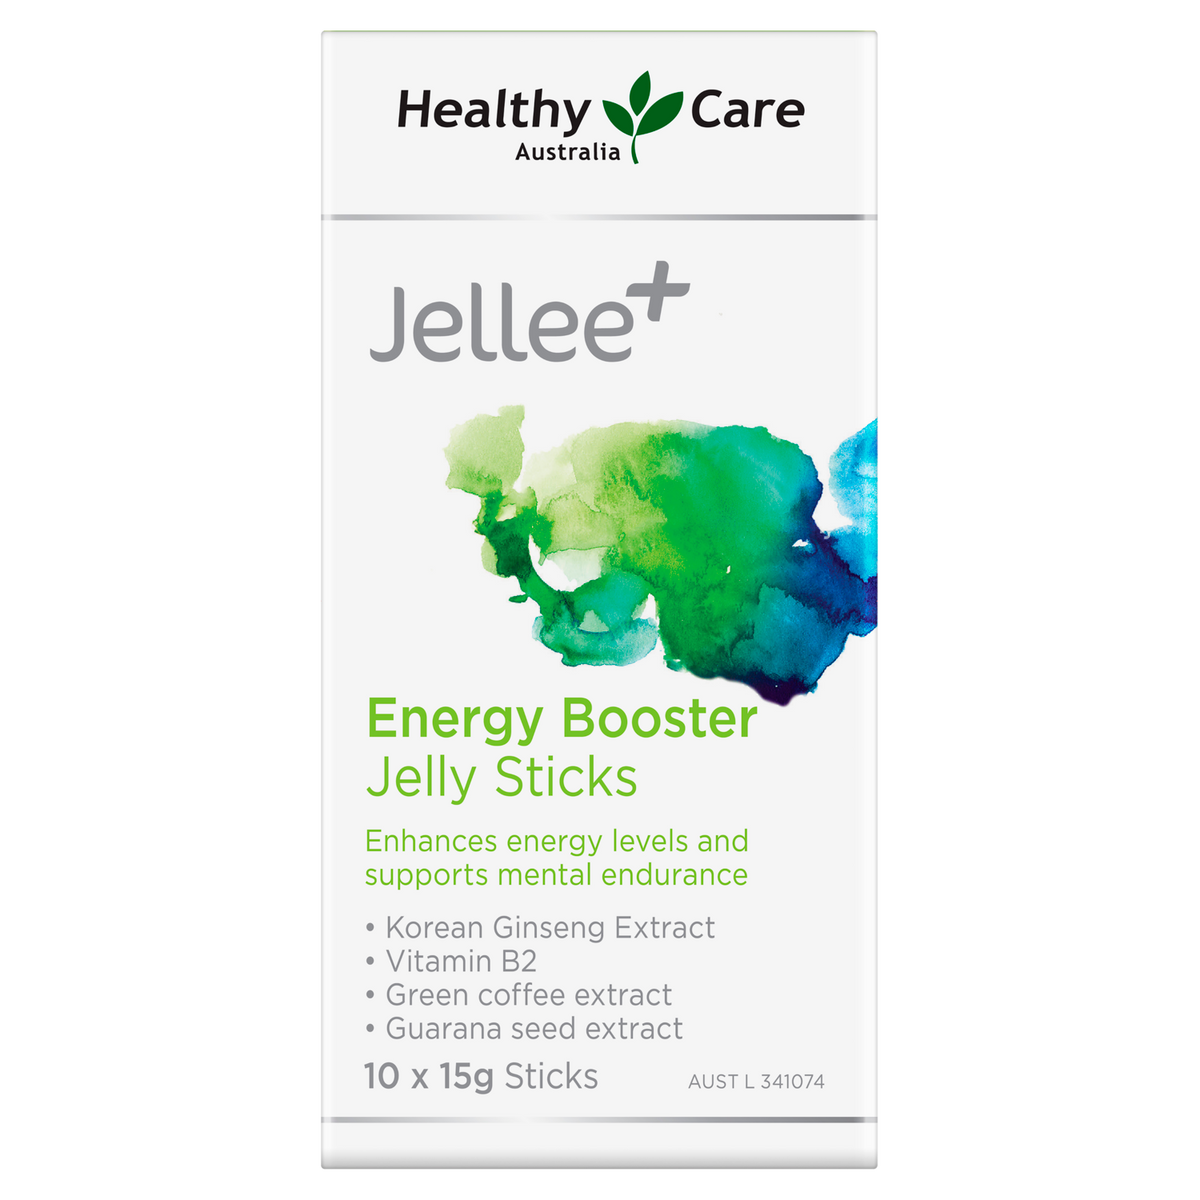 Jellee+ Energy Booster Jelly Sticks 10 x 15g Label-Vitamins & Supplements-Healthy Care Australia